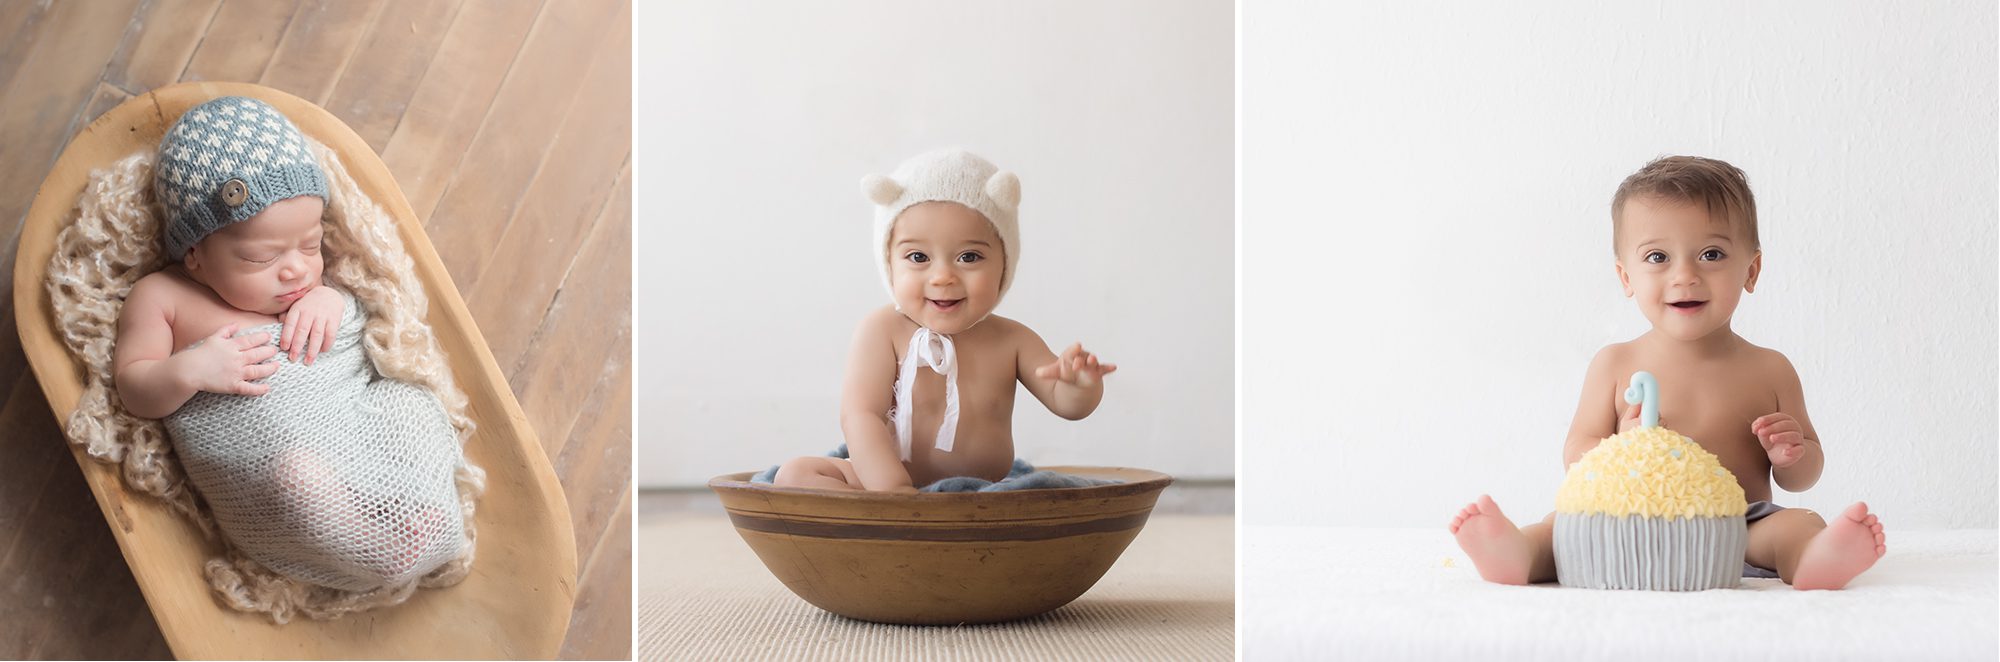 three pictures of the same boy, newborn sitting up and one year old